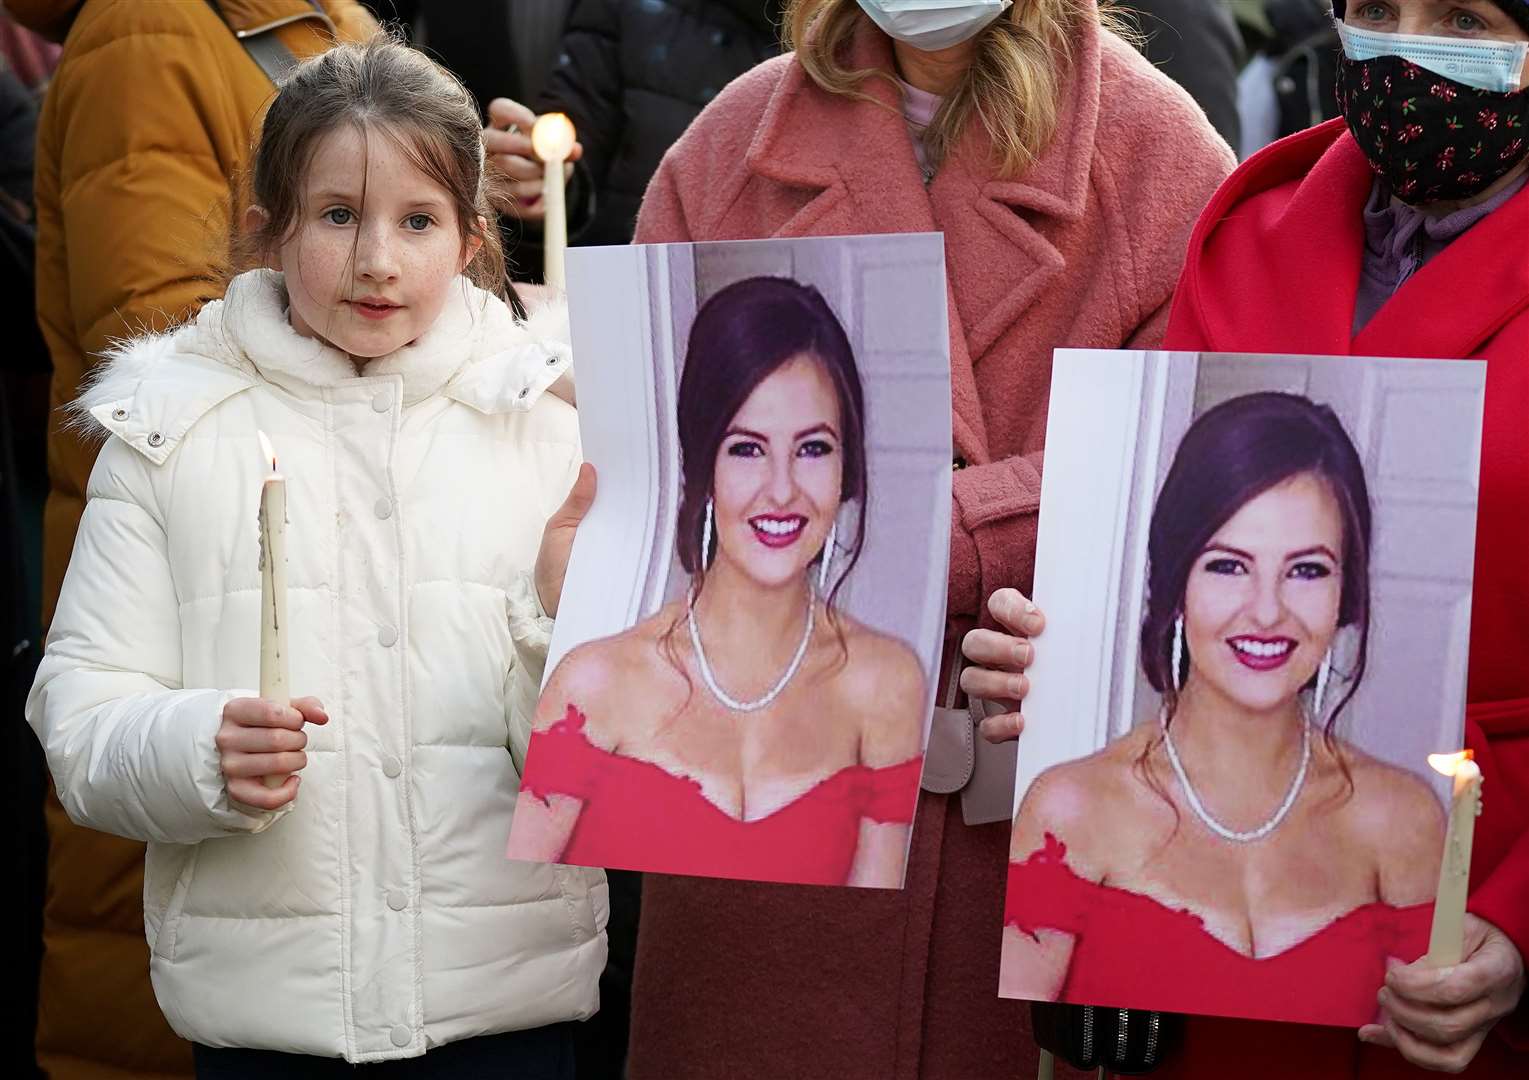 Alanna Norris, nine, attends a vigil at Leinster House, Dublin (Brian Lawless/PA)